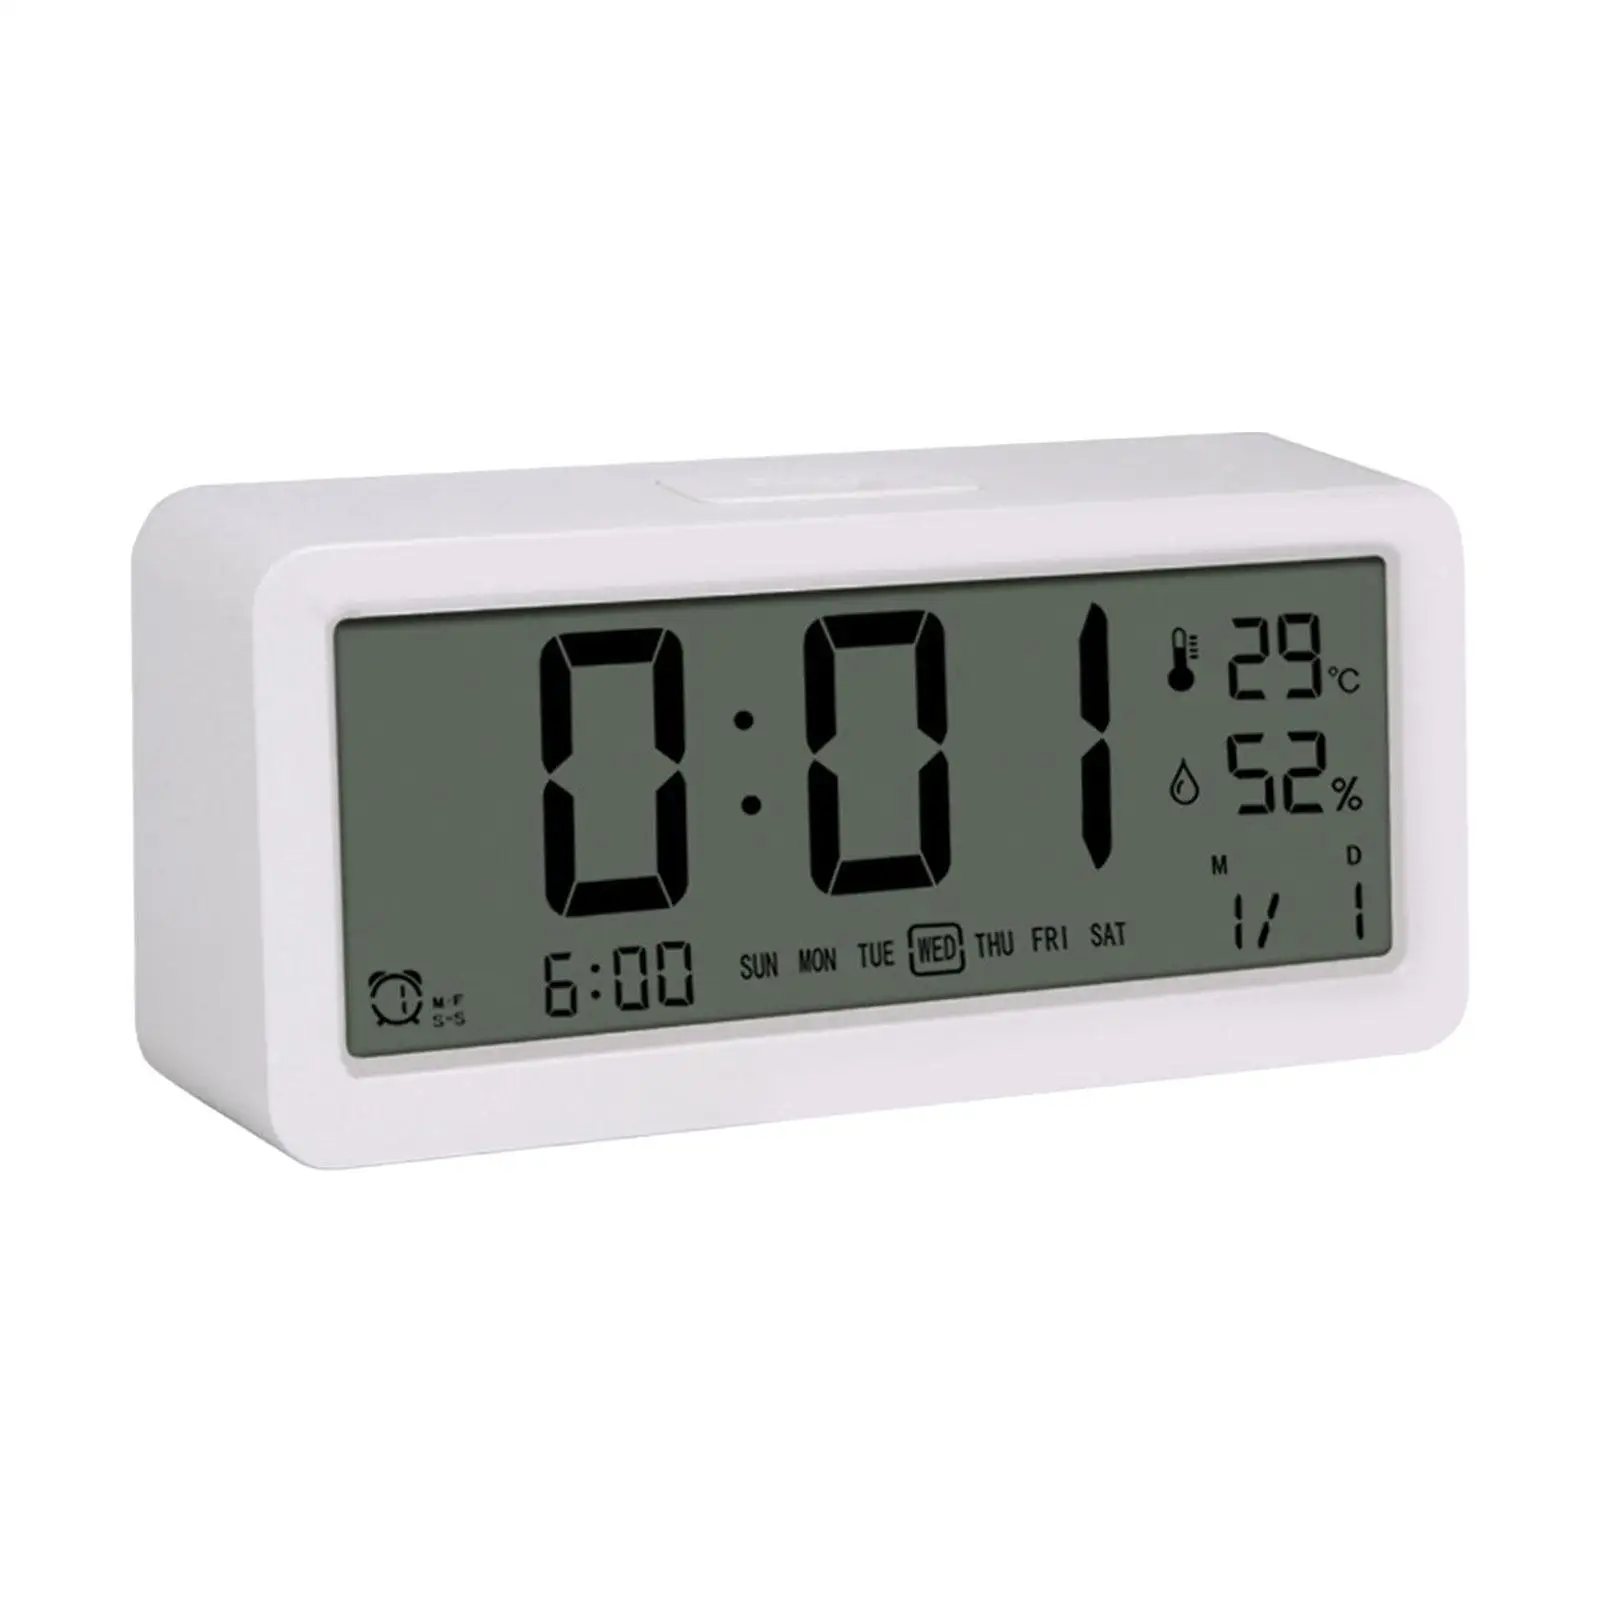 LCD Digital Alarm Clock Humidity Display Silent Snooze Function NightStand Portable for Children Adults Table Bedroom